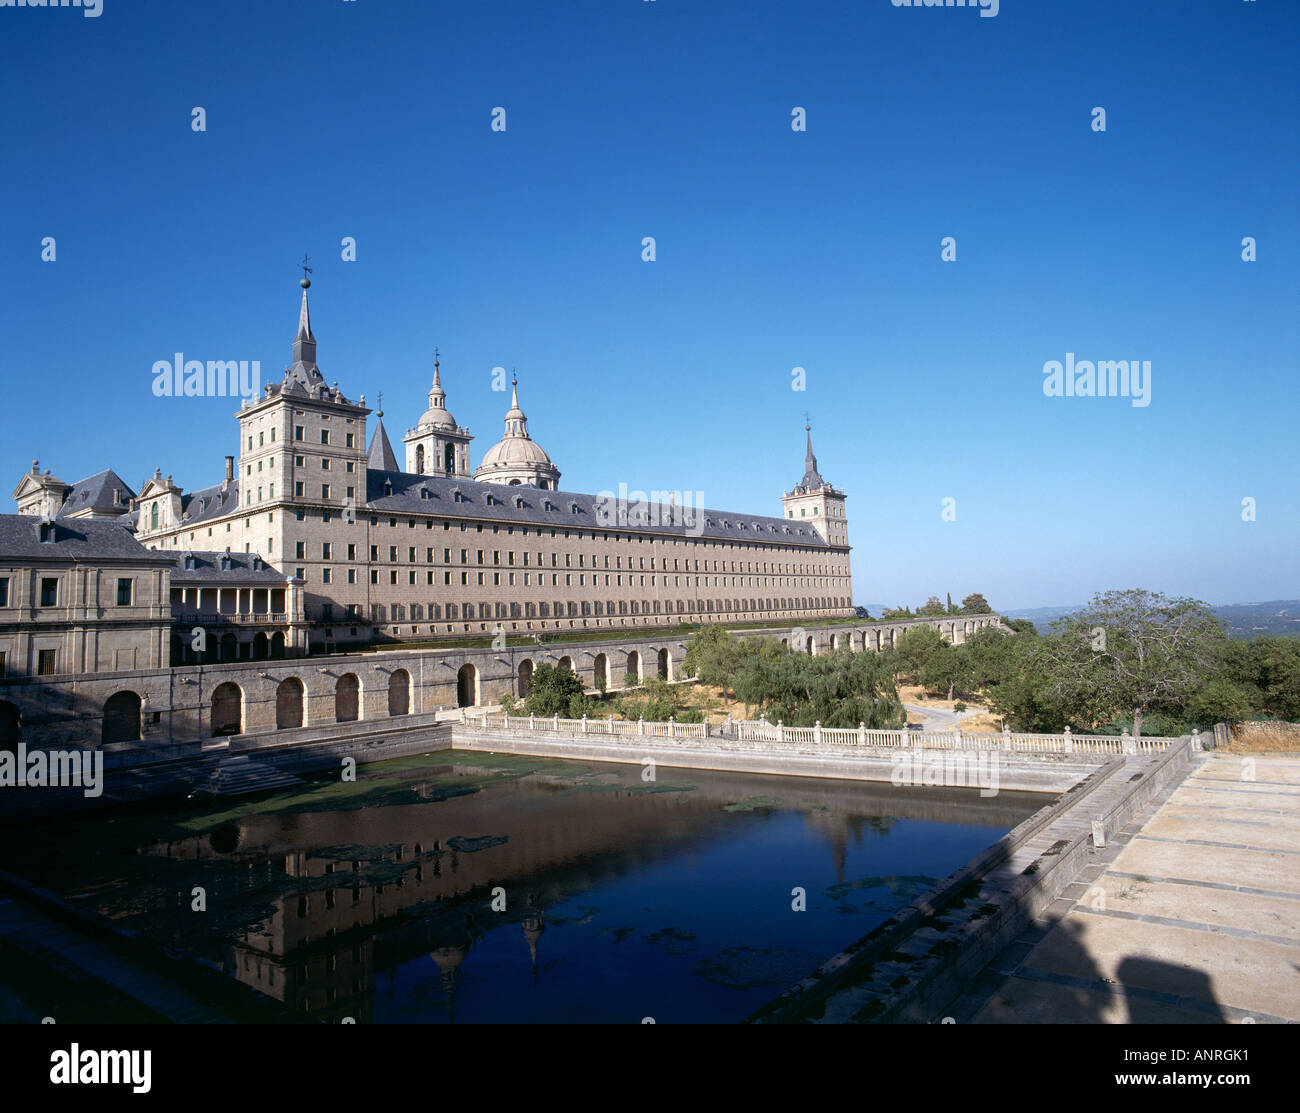 The facade and some of the 2 673 windows of the Palacio de San Lorenzo el Real de El Escorial built of granite in the 16th century on a monumental scale by Felipe II as a combination monastery palace mausoleum Stock Photo